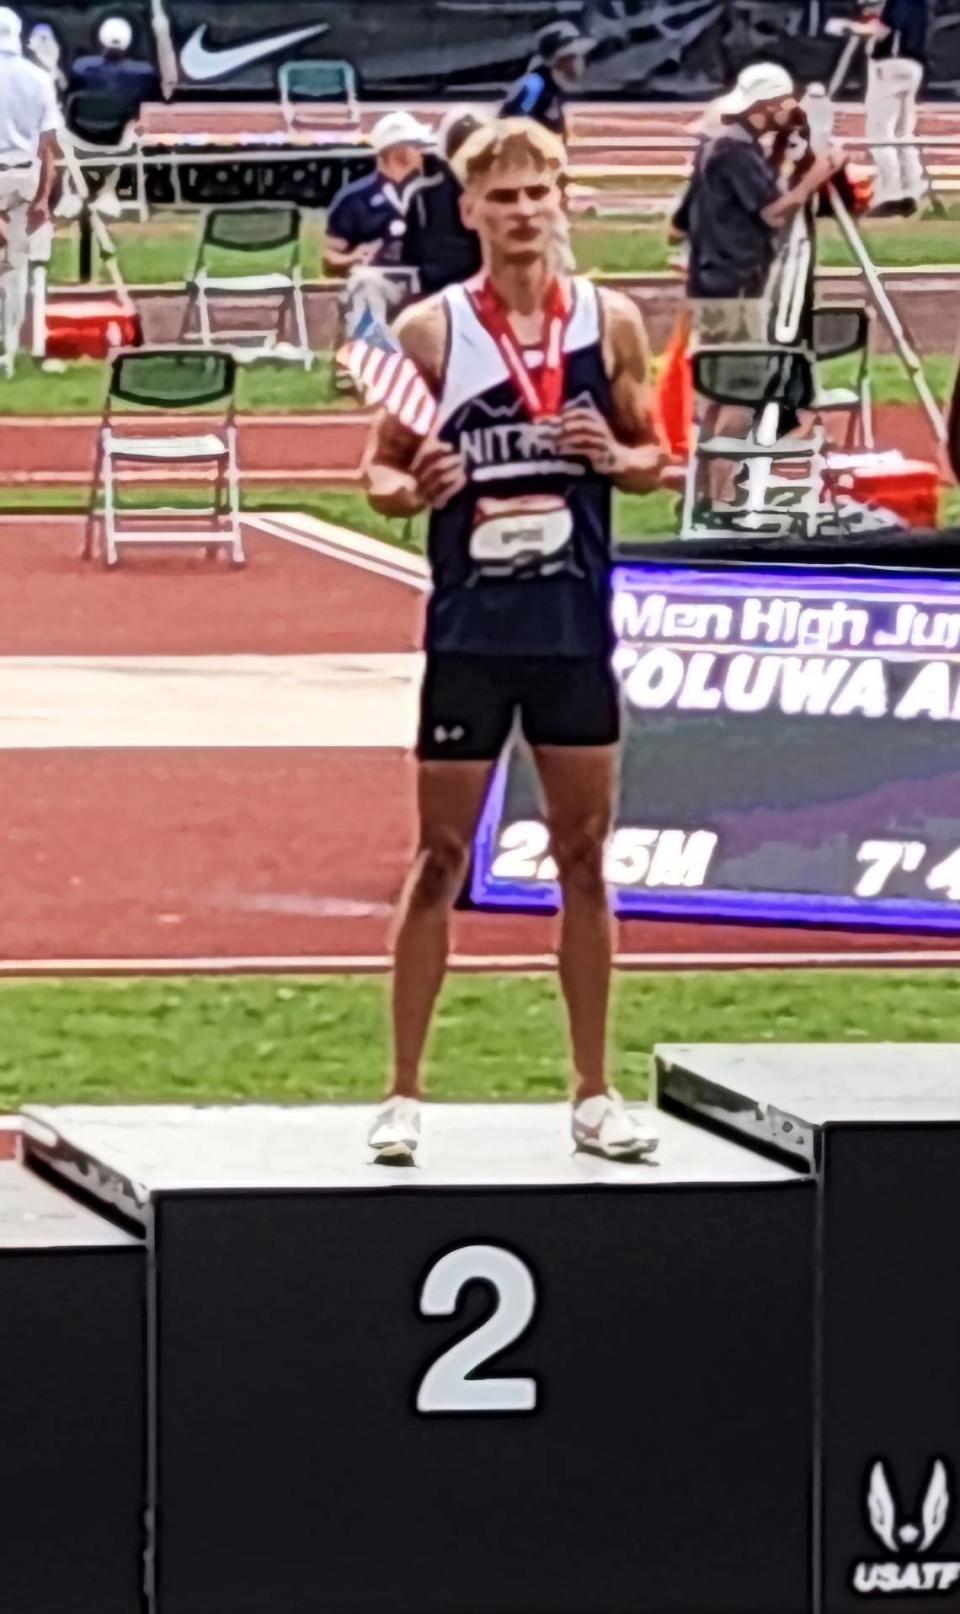 State College’s Jesse Myers, who also runs for the Nittany Track and Field Youth Club, finished with a silver medal Thursday in the 200-meter dash at the USATF U20 Championships in Oregon. The performance qualified him for August’s world championships in Peru.